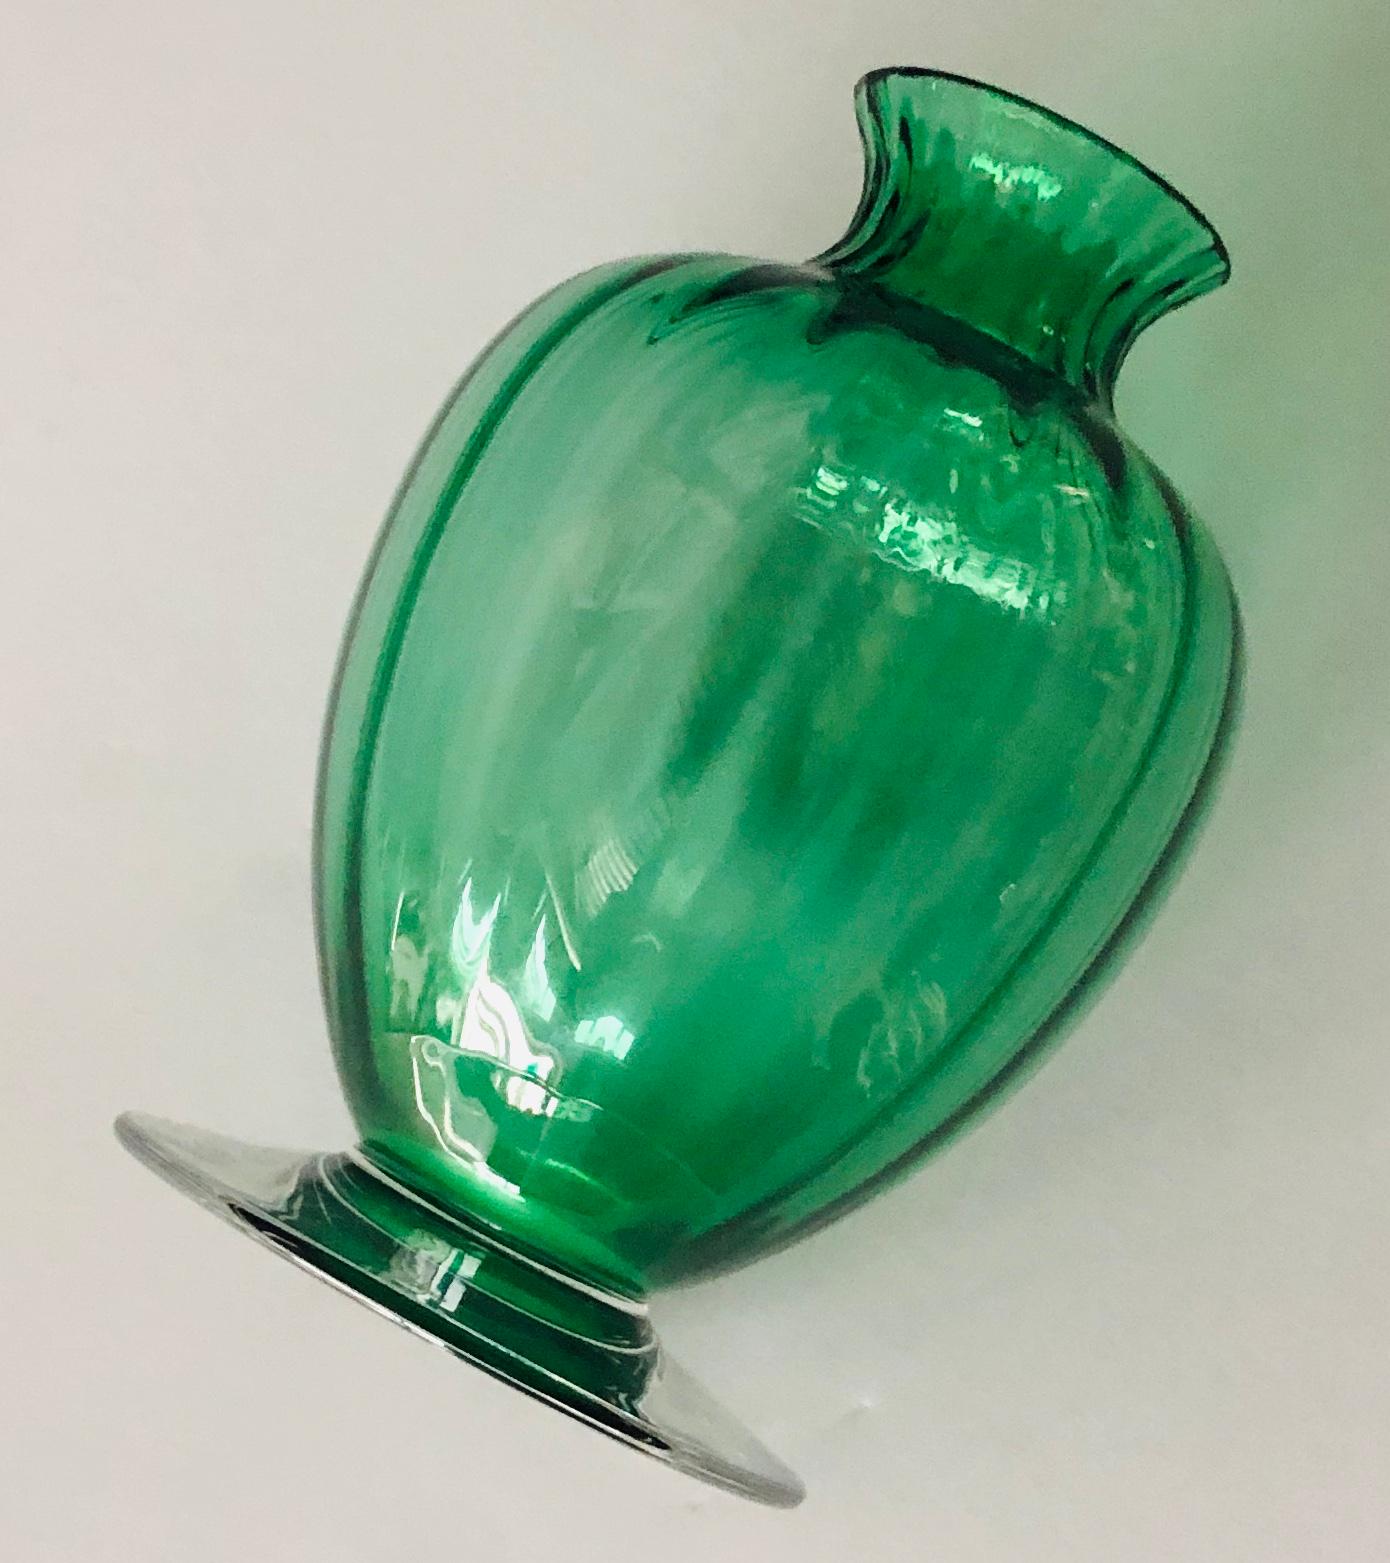 Offered is a signed Mid-Century Modern signed Baccarat elegant small baluster form bud vase of emerald green ribbed crystal and clear spreading foot, with acid etched maker's mark on the bottom and Baccarat sticker. This little piece would add a